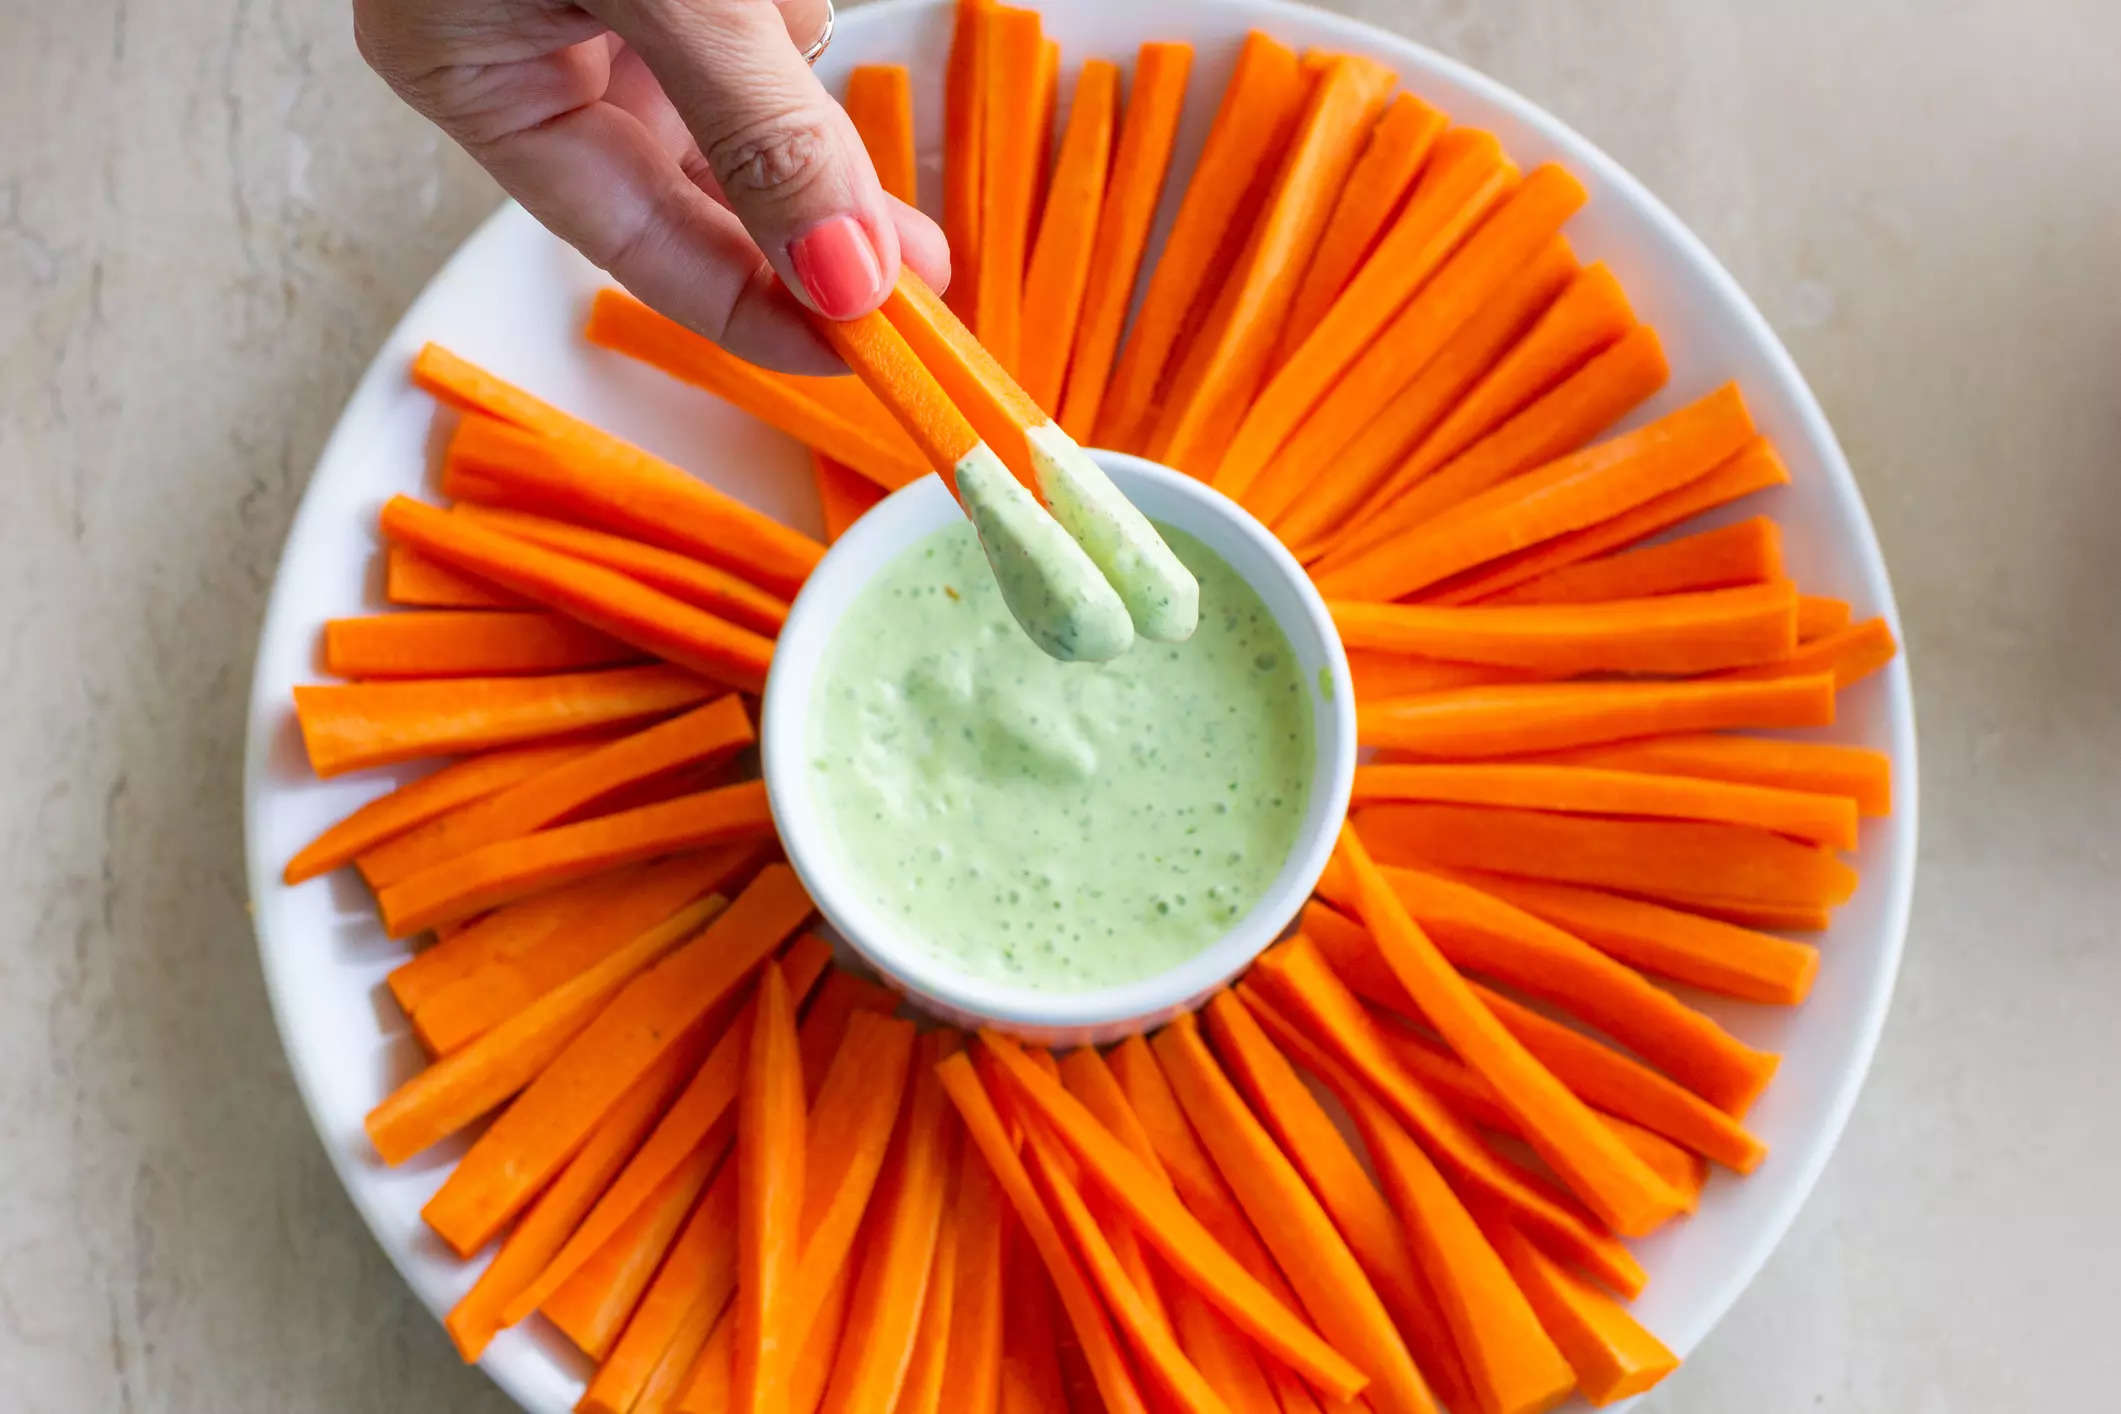 Often, people like eating carrots raw with a touch of lemon juice or as is with hummus.